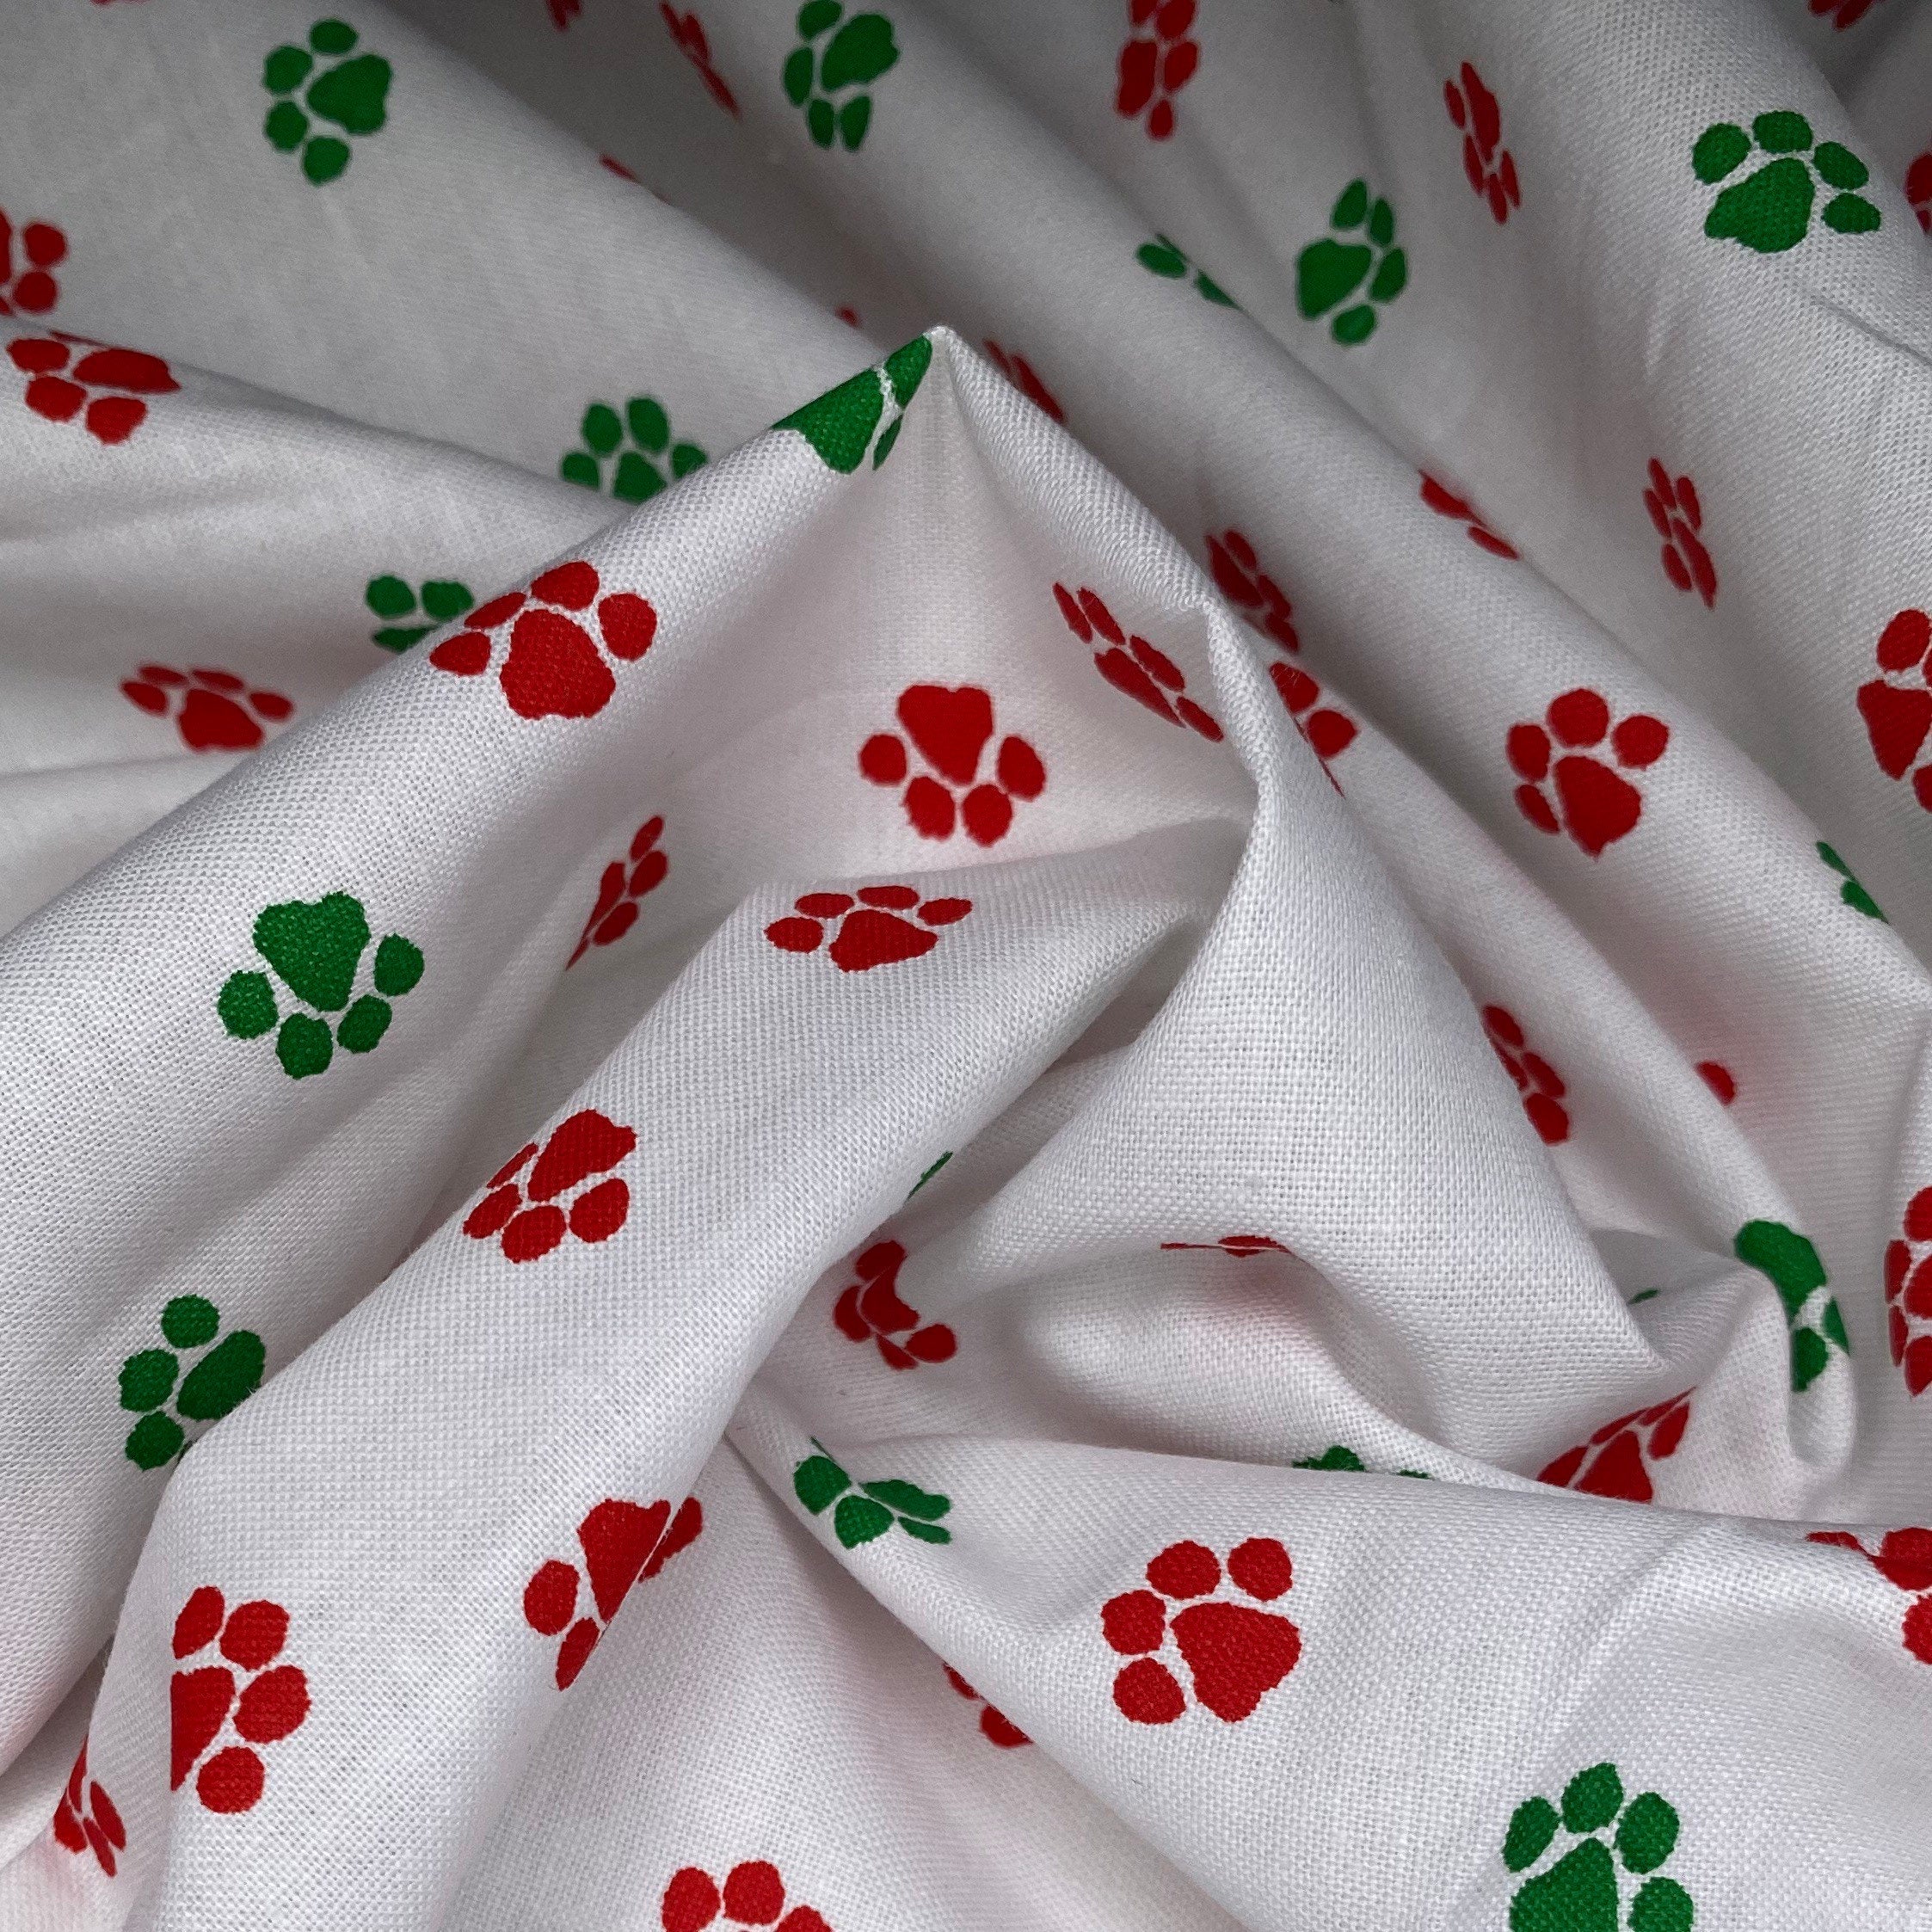 Quilting Cotton - Christmas Paw Prints - White/Red/Green